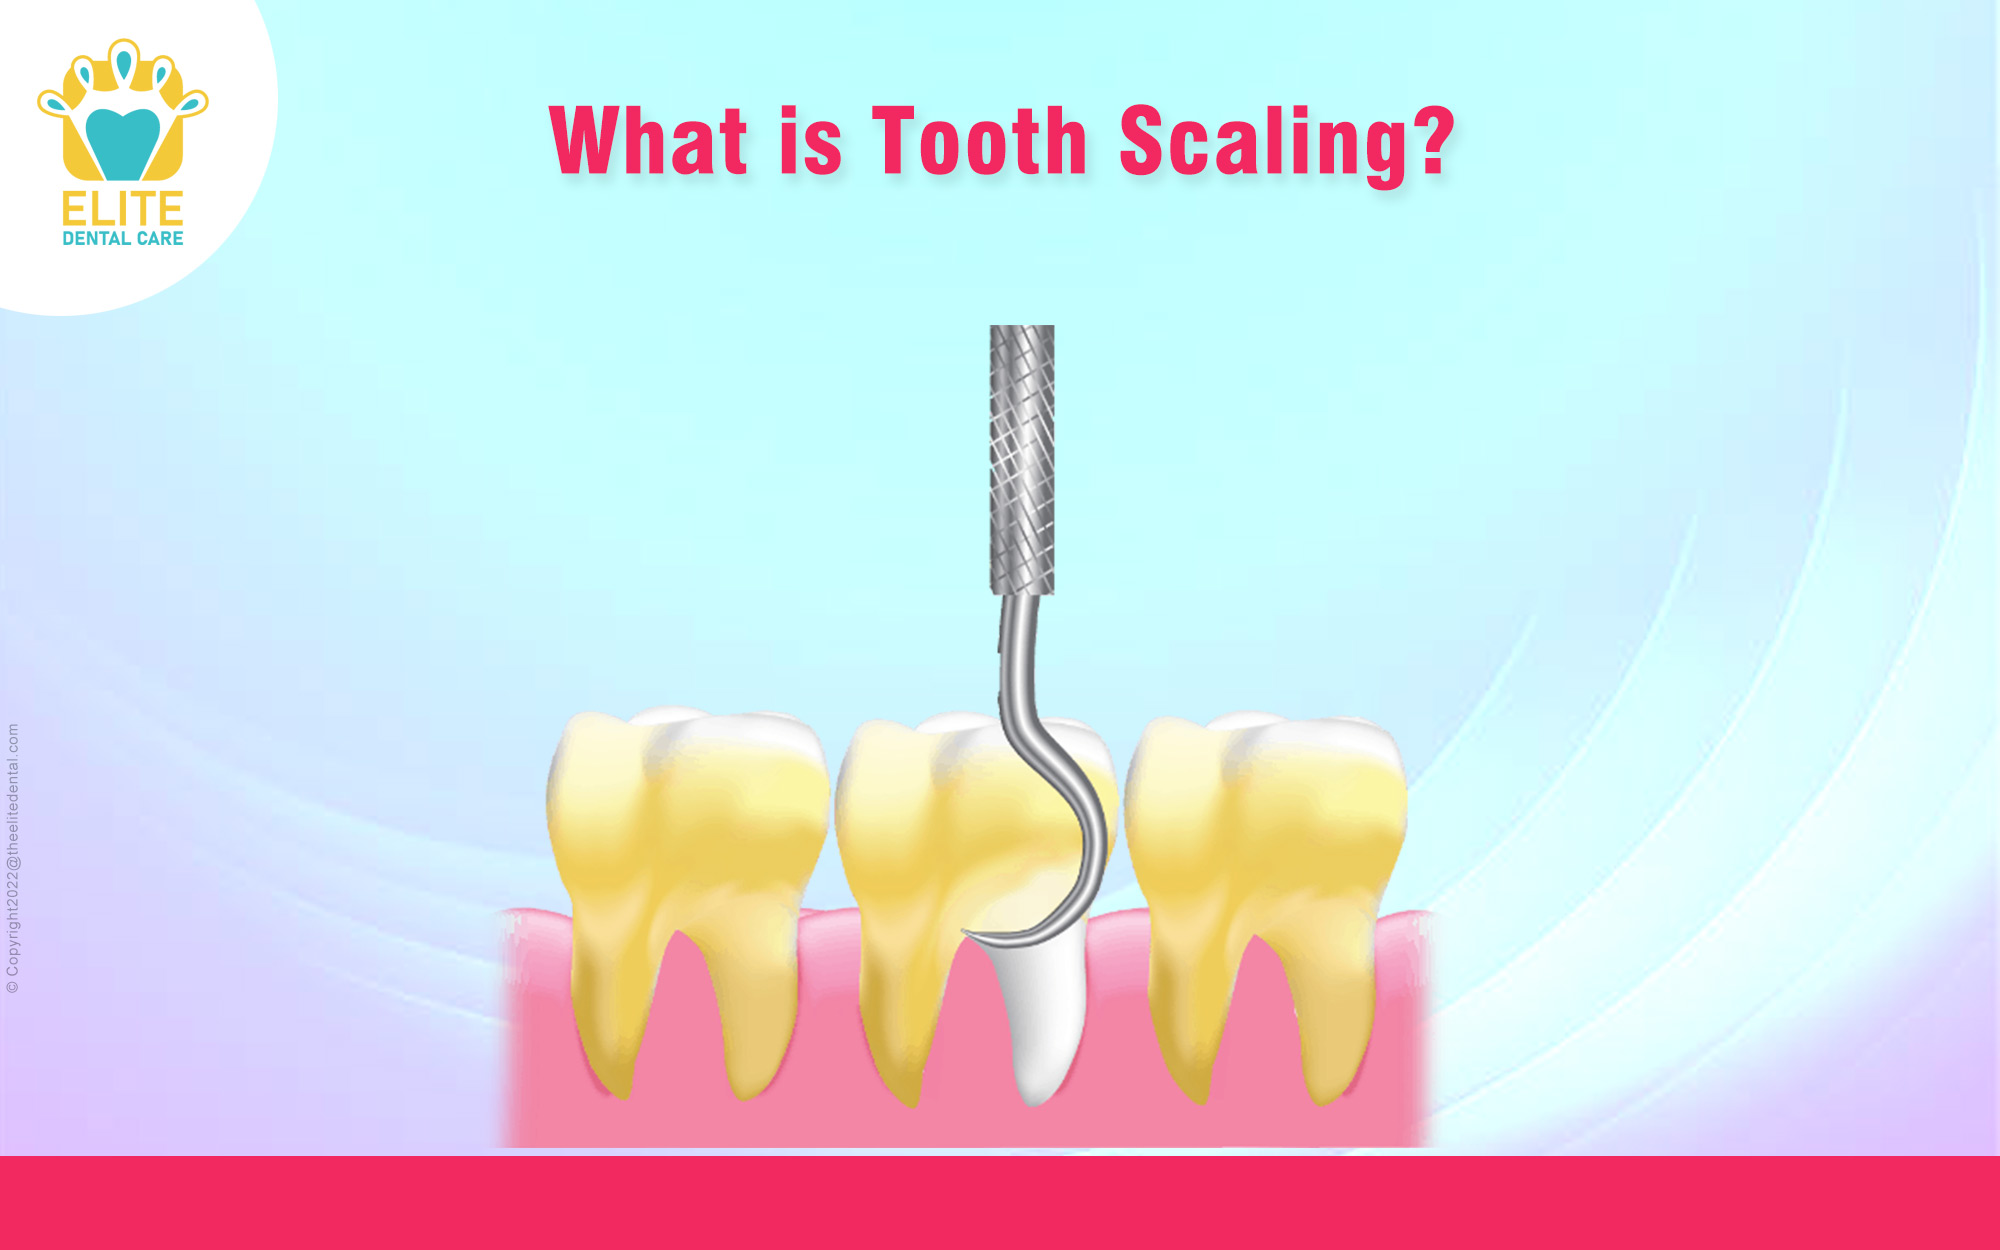 What is Tooth Scaling?